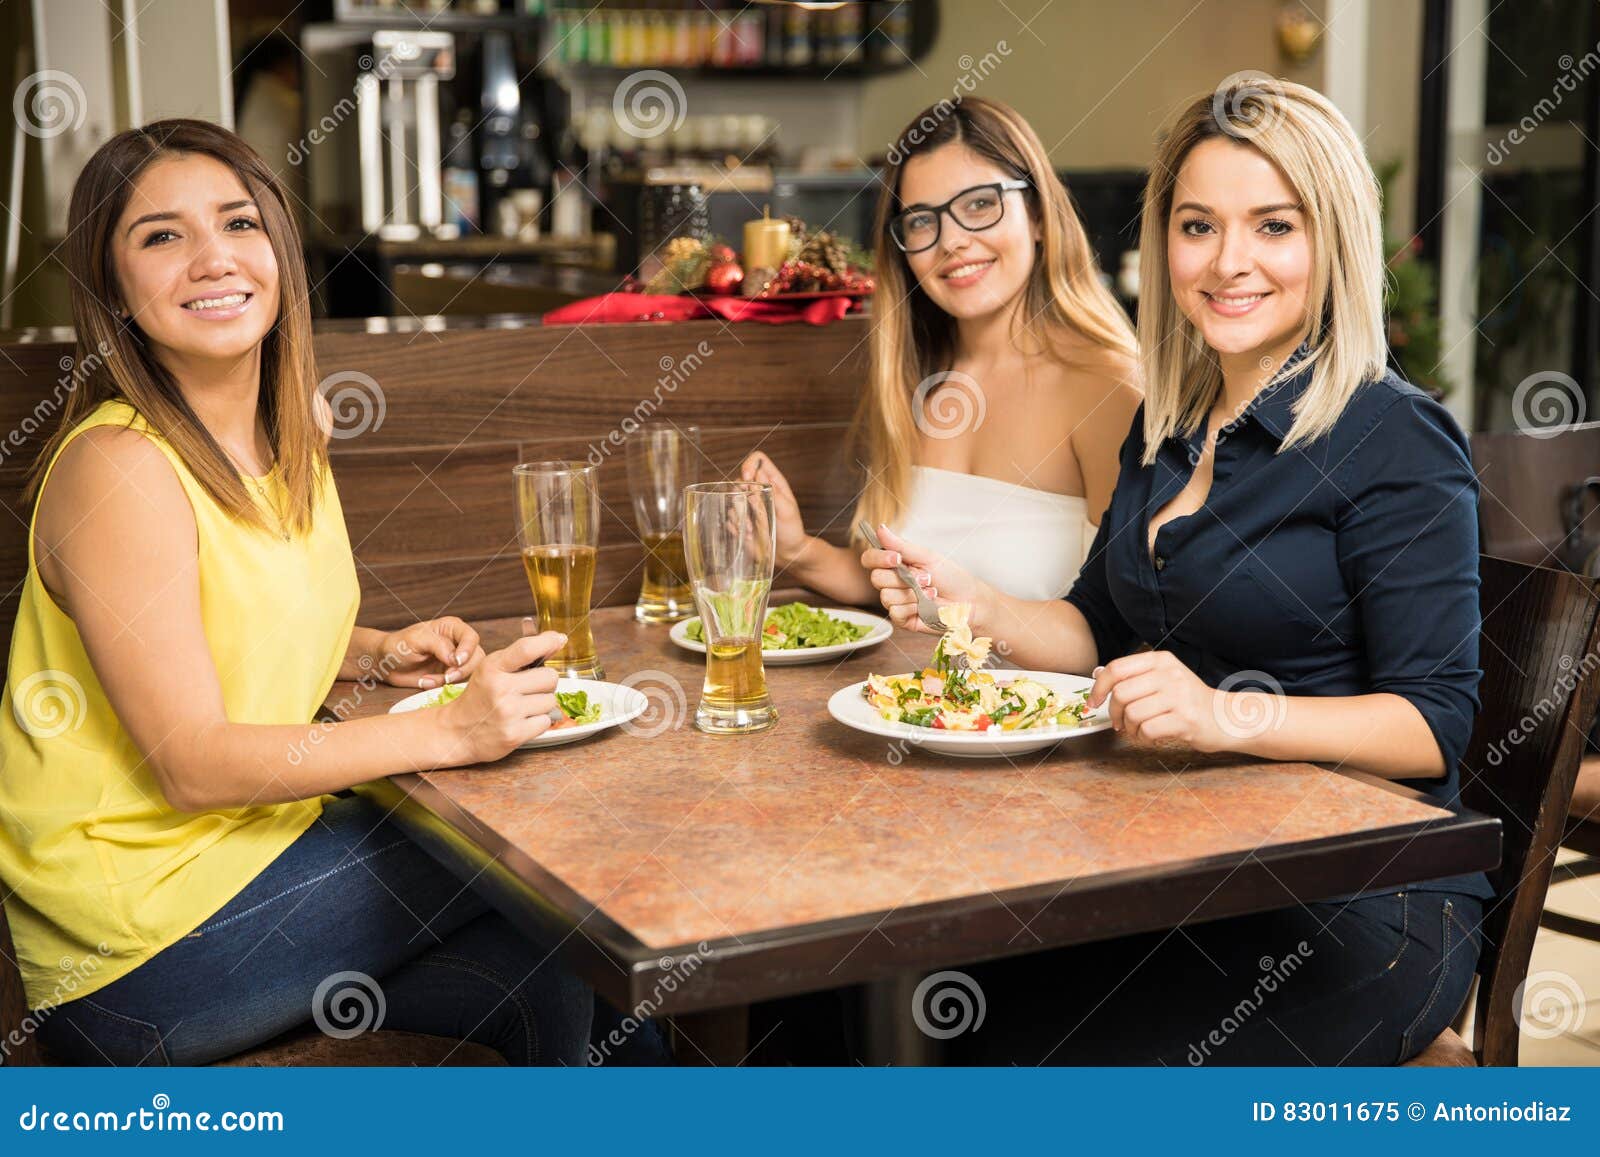 Female Friends Eating in a Restaurant Stock Image - Image of casual